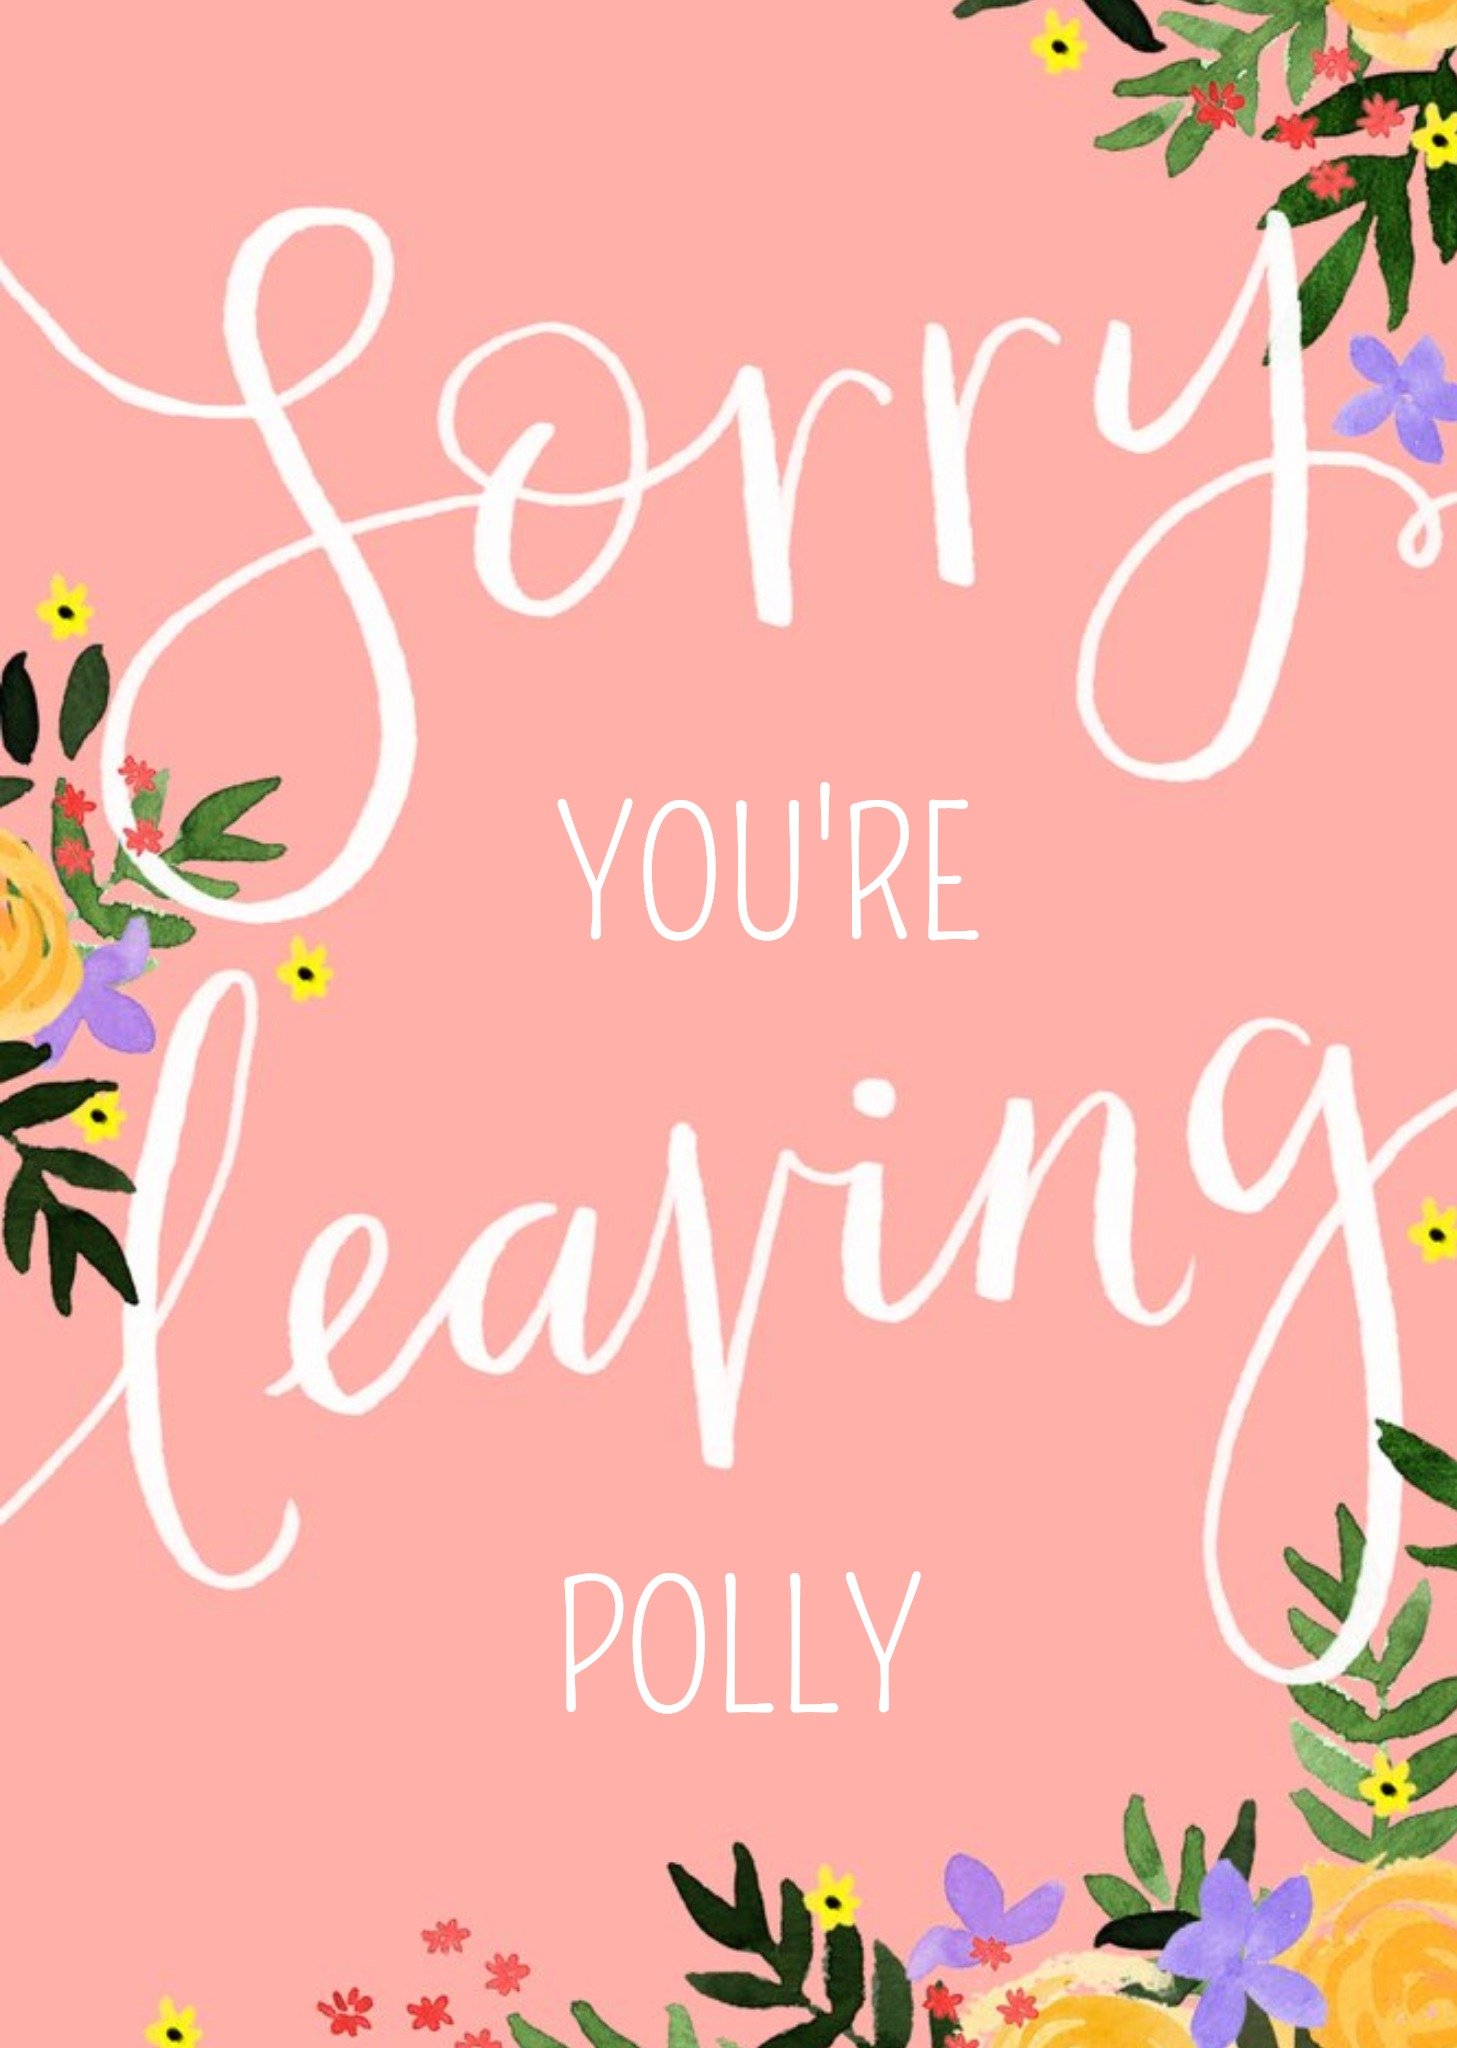 Moonpig Scriptive Typography Surrounded By Flowers On A Pink Background Sorry You're Leaving Card, L